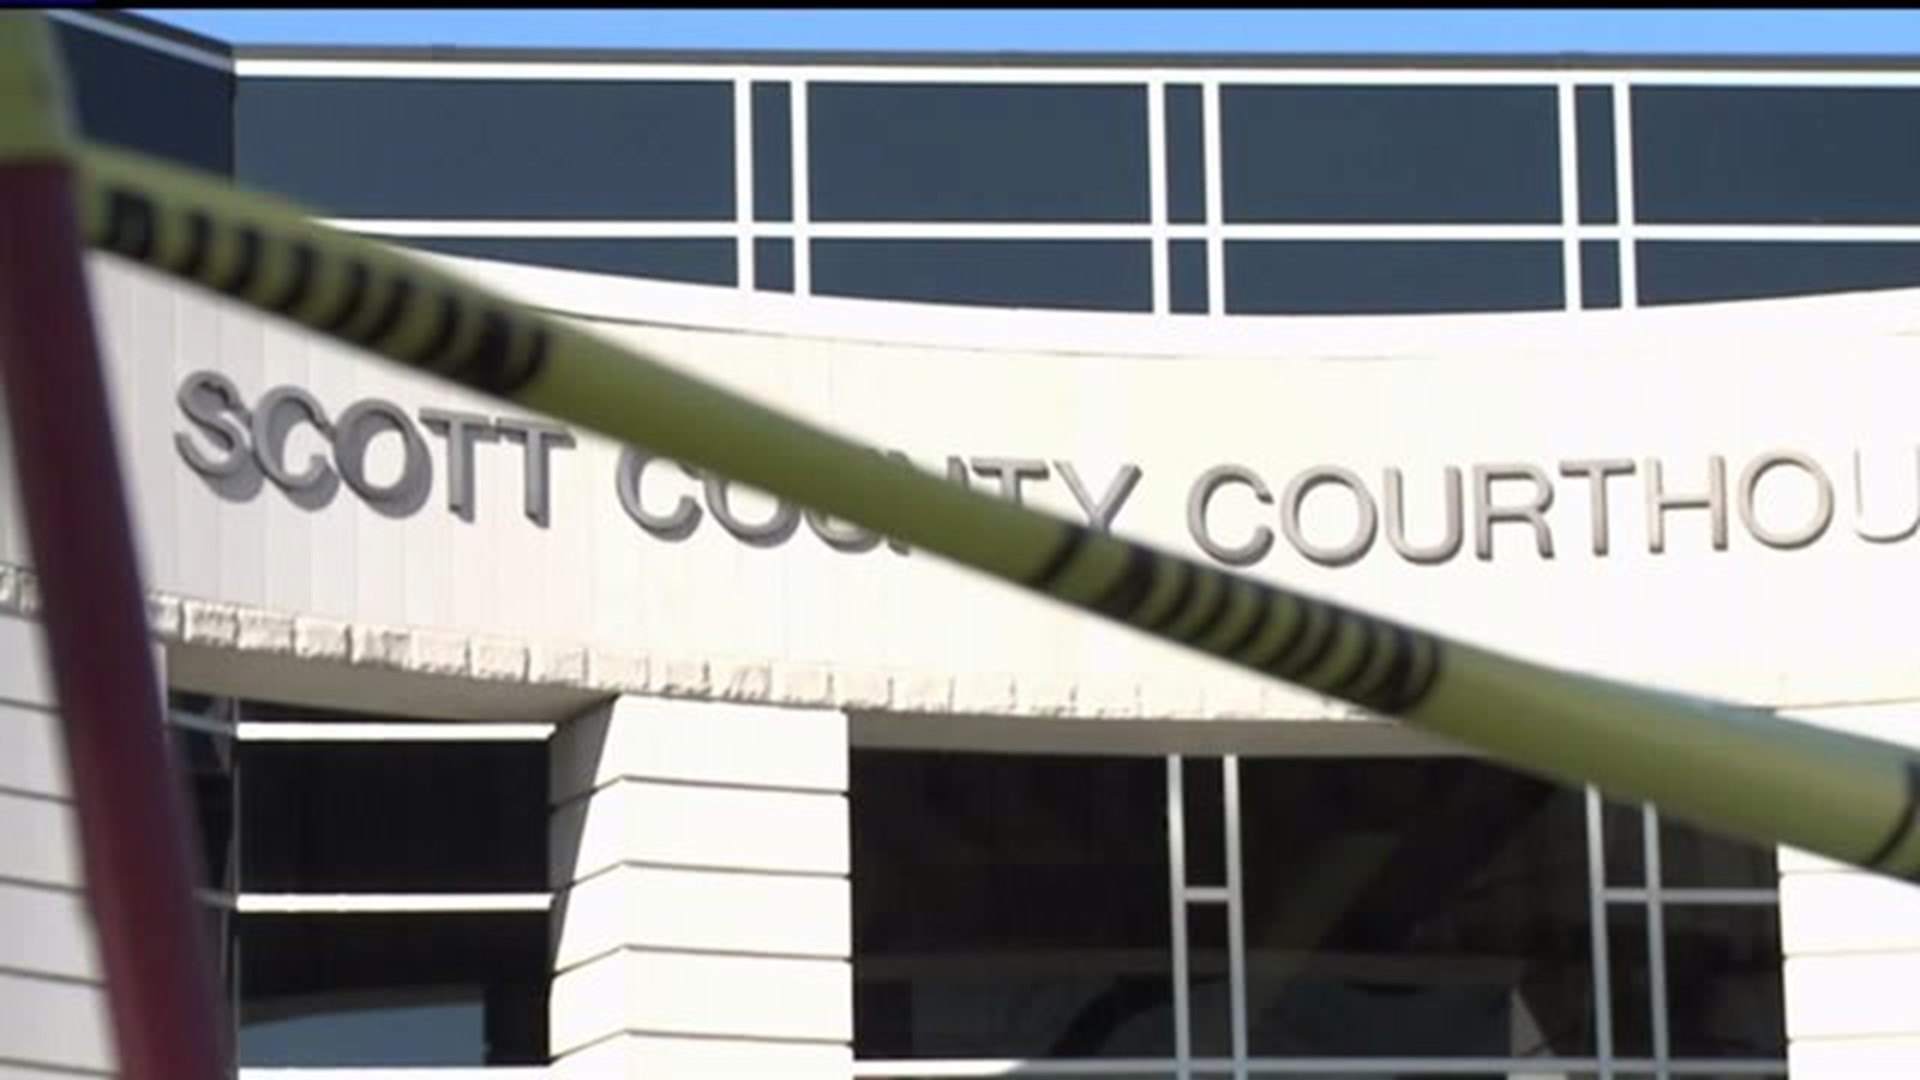 Money discovered missing from Scott County accounts